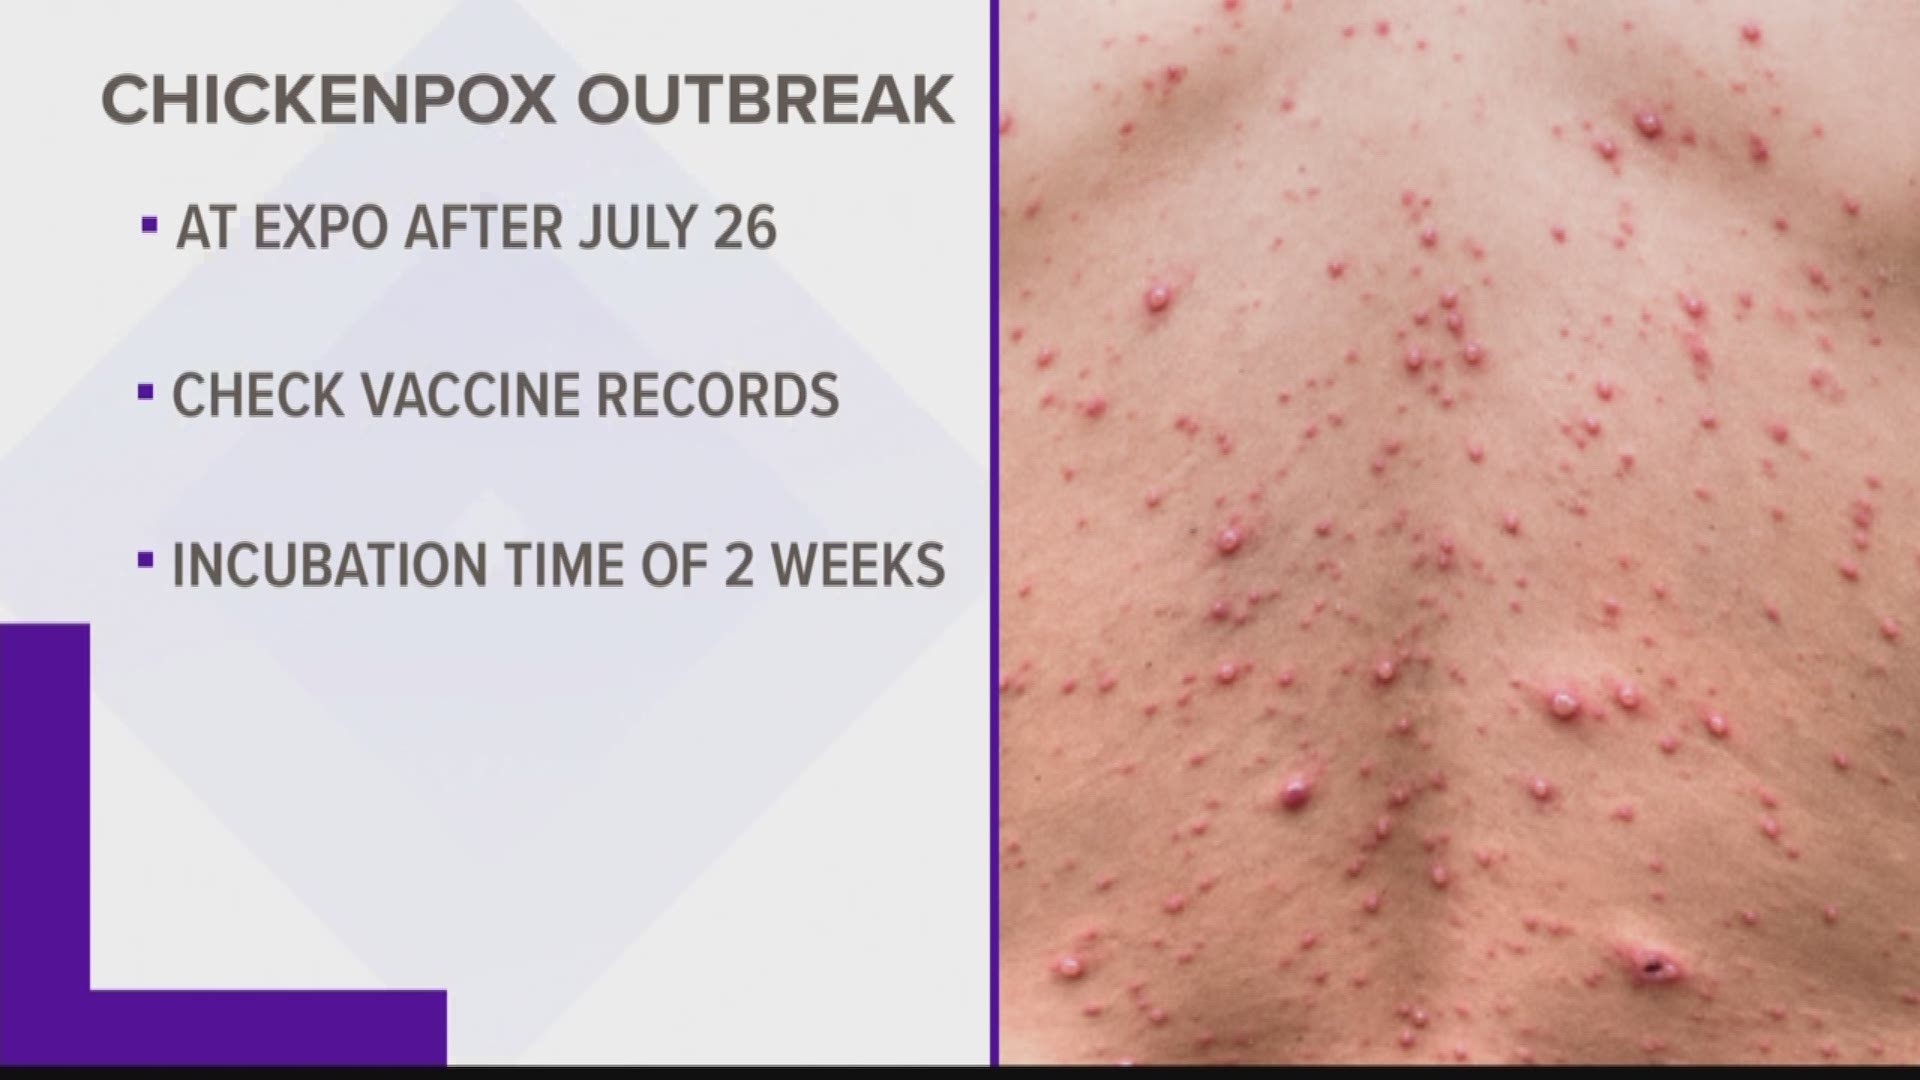 Portland health officials say staff and volunteers at the Portland expo may have been exposed to chickenpox.